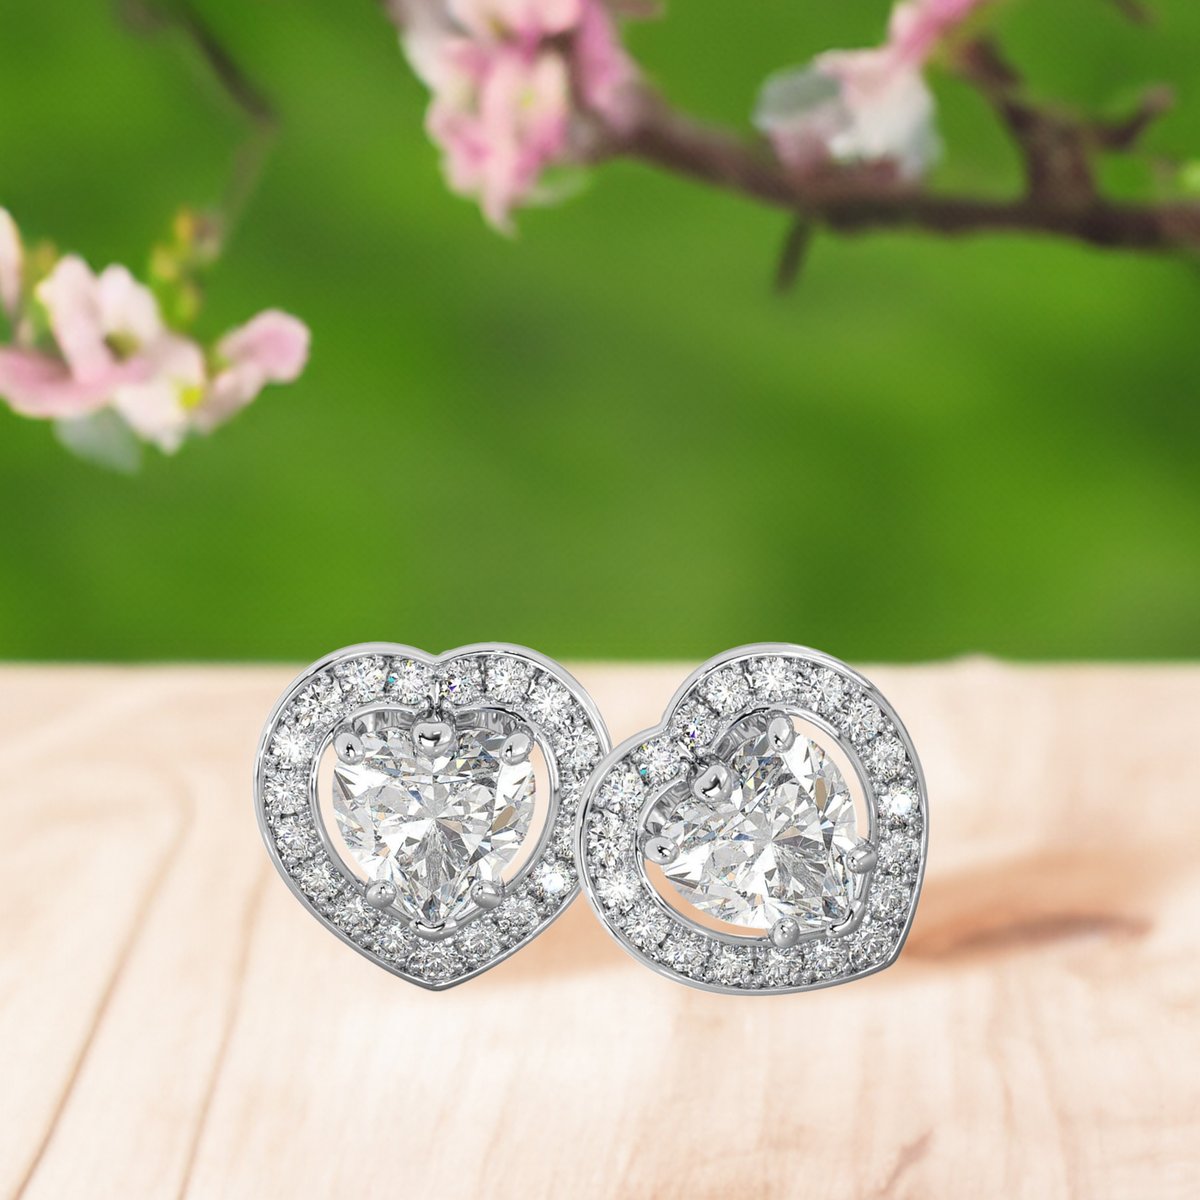 💙💎 Super elegant sterling silver earrings with a lovely #heart shaped cubic zirconia in the centre

Find them here: bit.ly/2DlY5RC

#womenearrings #weddingearrings #lovejewelry #silverjewelry #sterlingsilver #cubiczirconia #fashion #glamorous #besttohave